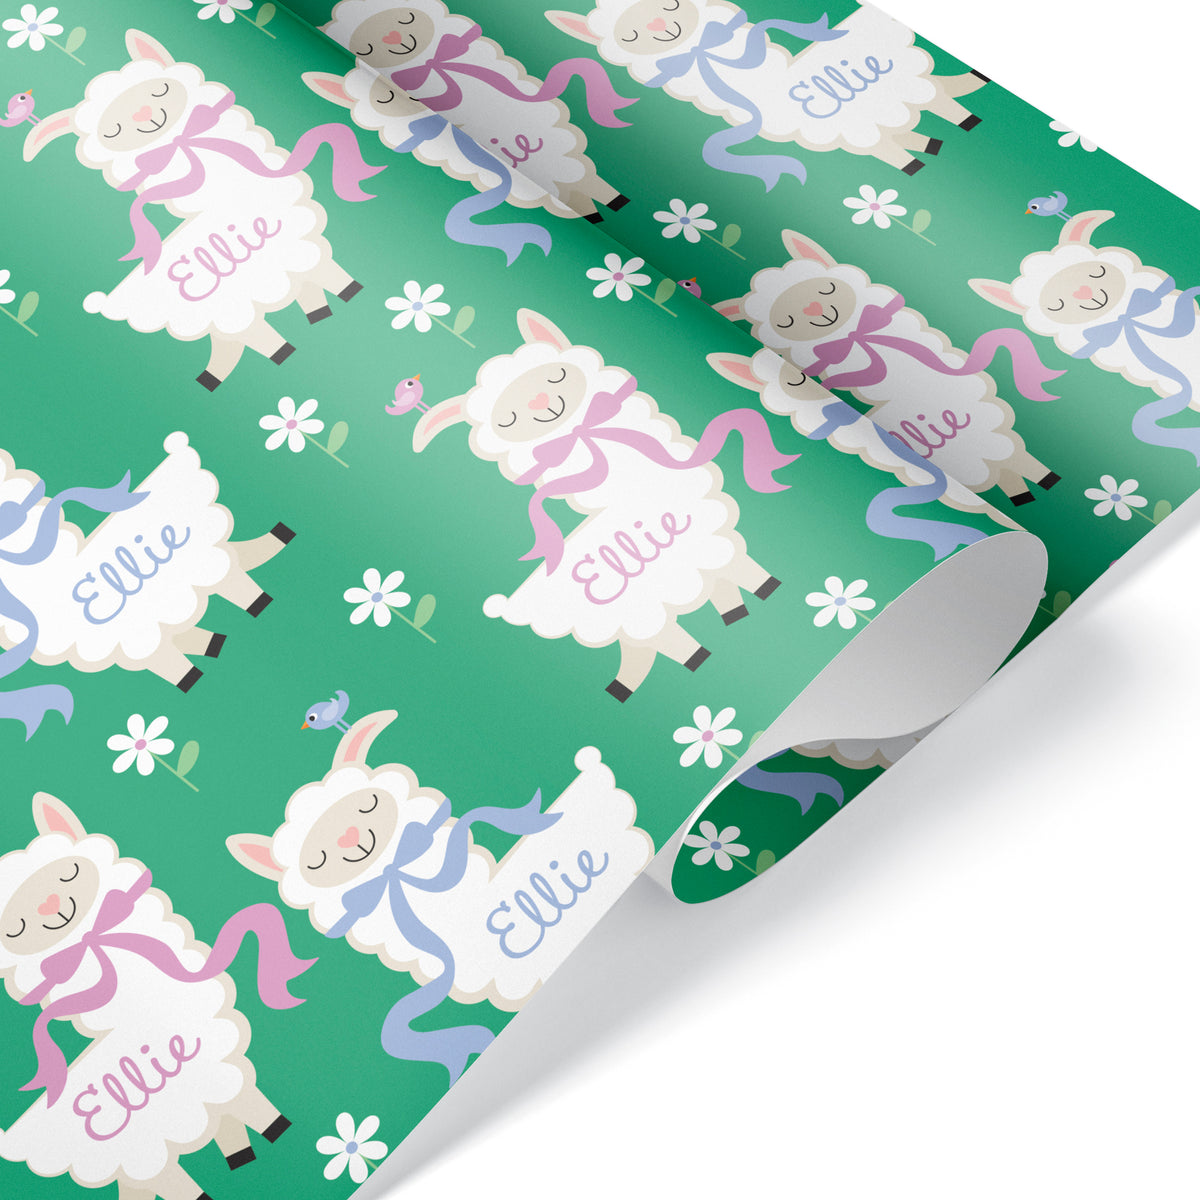 Llama Personalized Name Wrapping Paper - Rose/Lavender